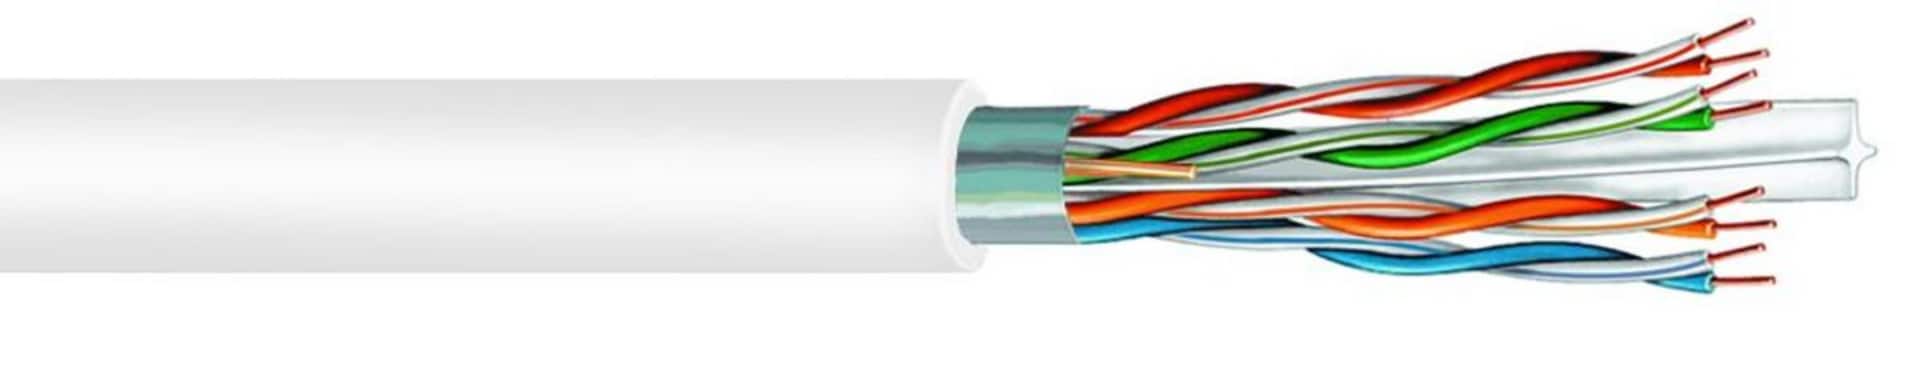 CommScope Uniprise 1000' CAT6 F/UTP Shielded Plenum Twisted Pair Cable - Wh